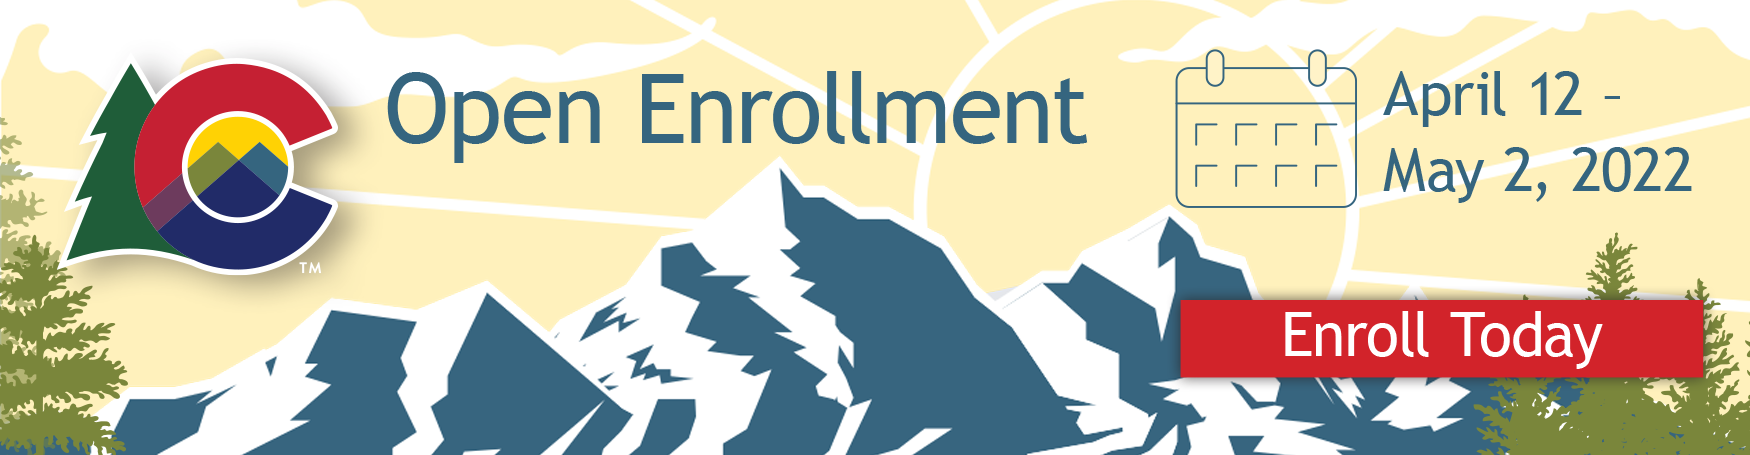 Open Enrollment -April 12 - May 2, 2022 Click to Enroll Today. Landscape image of a snow-capped mountain range and evergreens mirrored in still lake water.